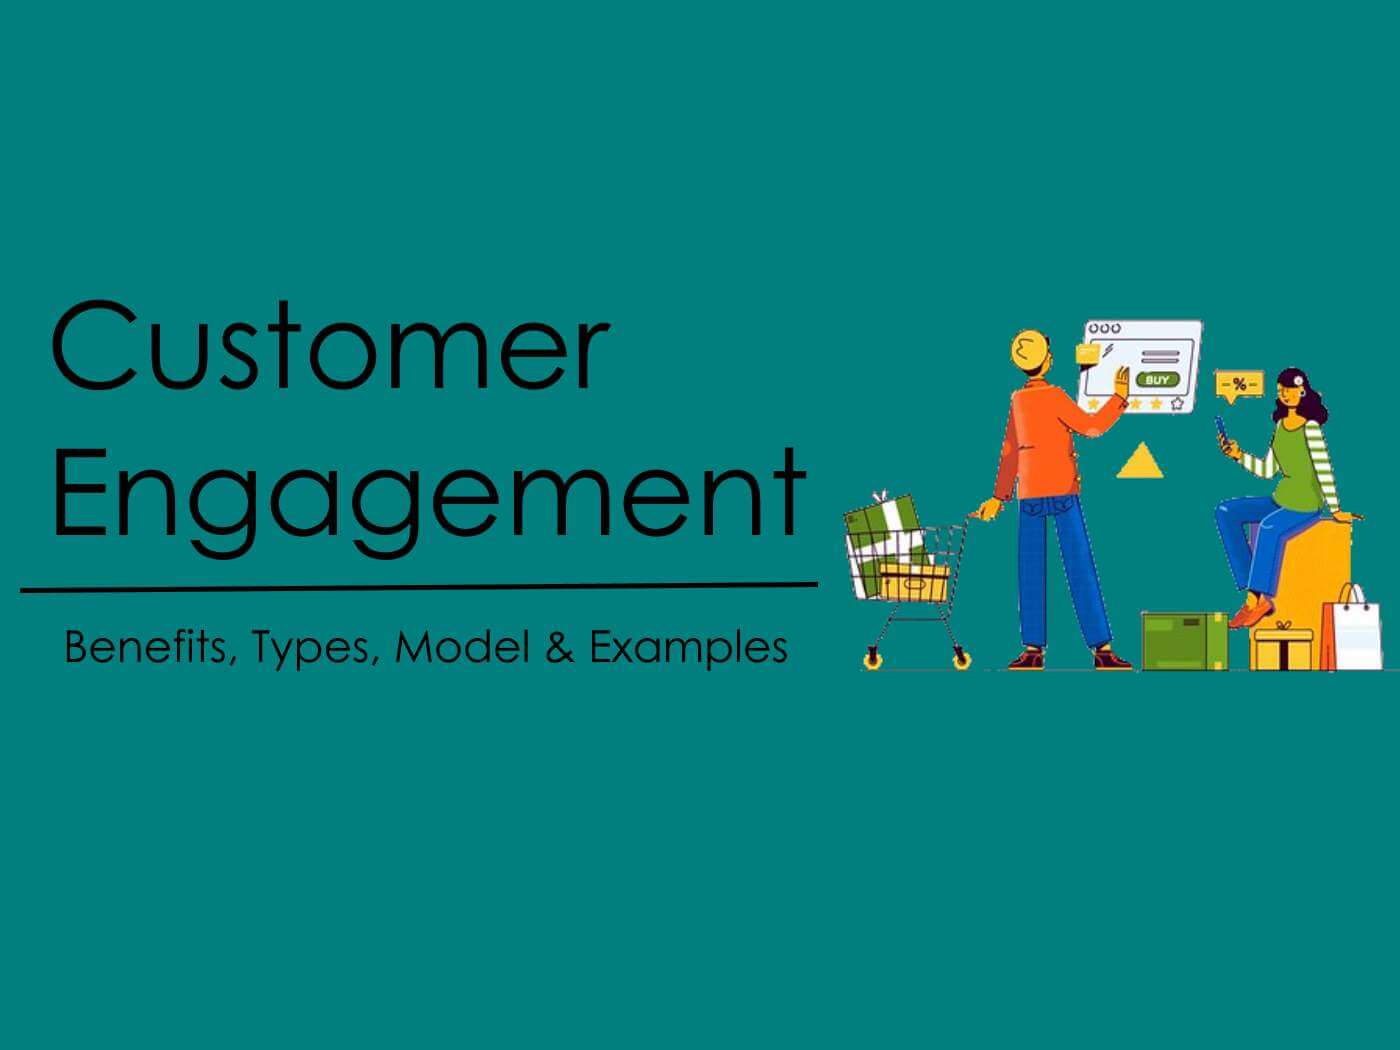 Driving Customer Engagement Over Covid 19 Lockyers Insurance 101: Why ...